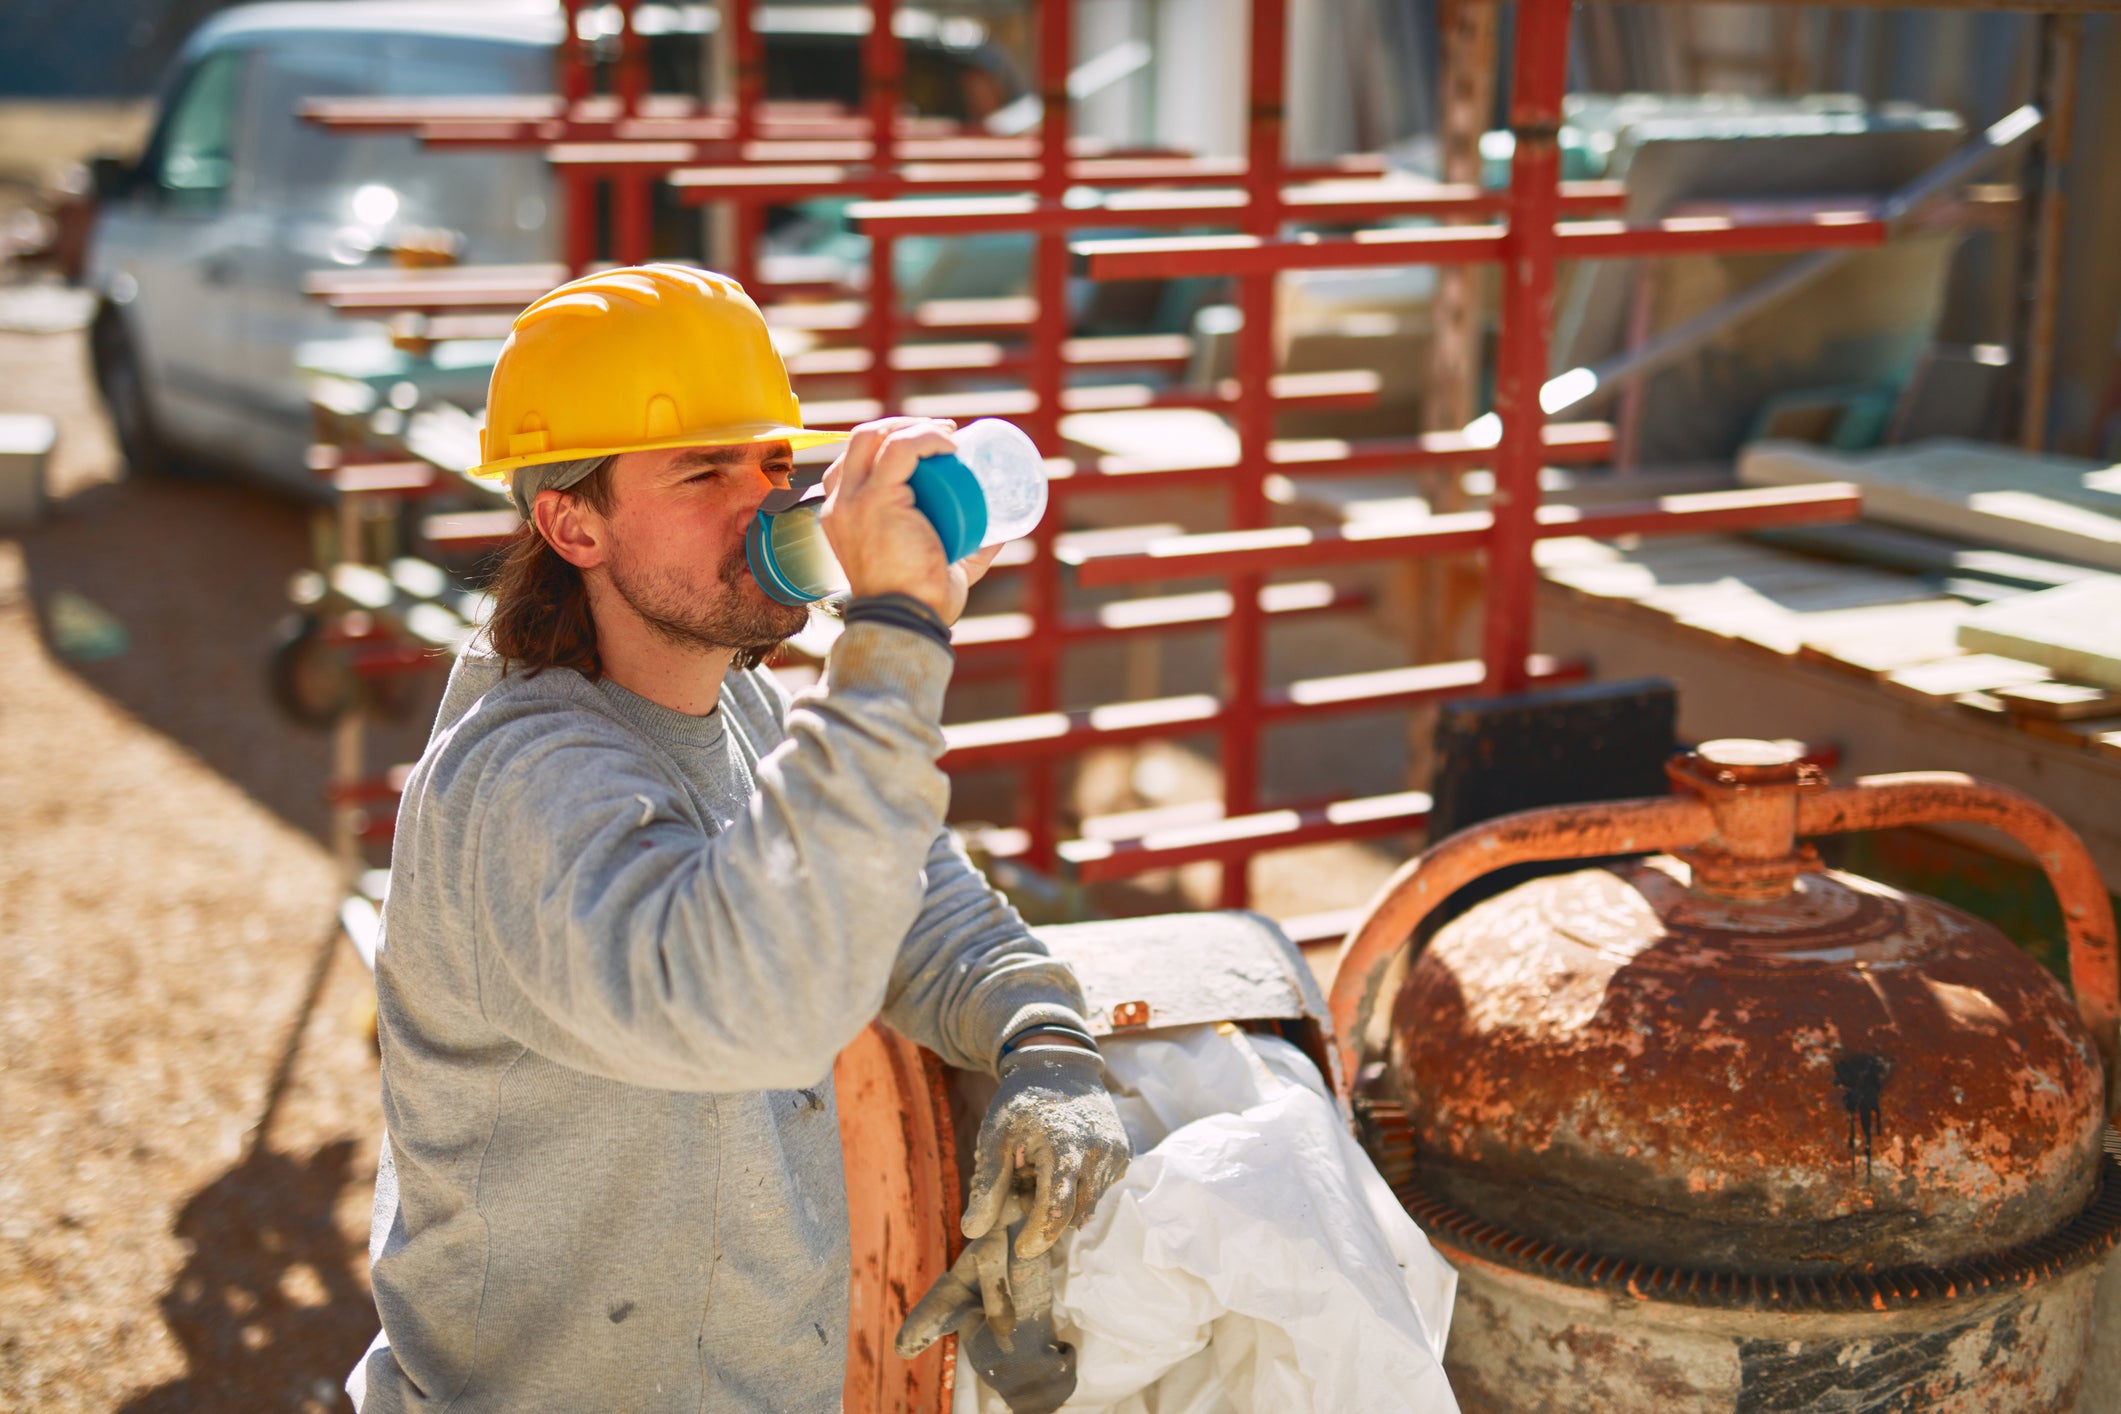 How Electrolyte Drink Can Keep You Safe and Hydrated in Extreme Heat Outdoor Working Conditions